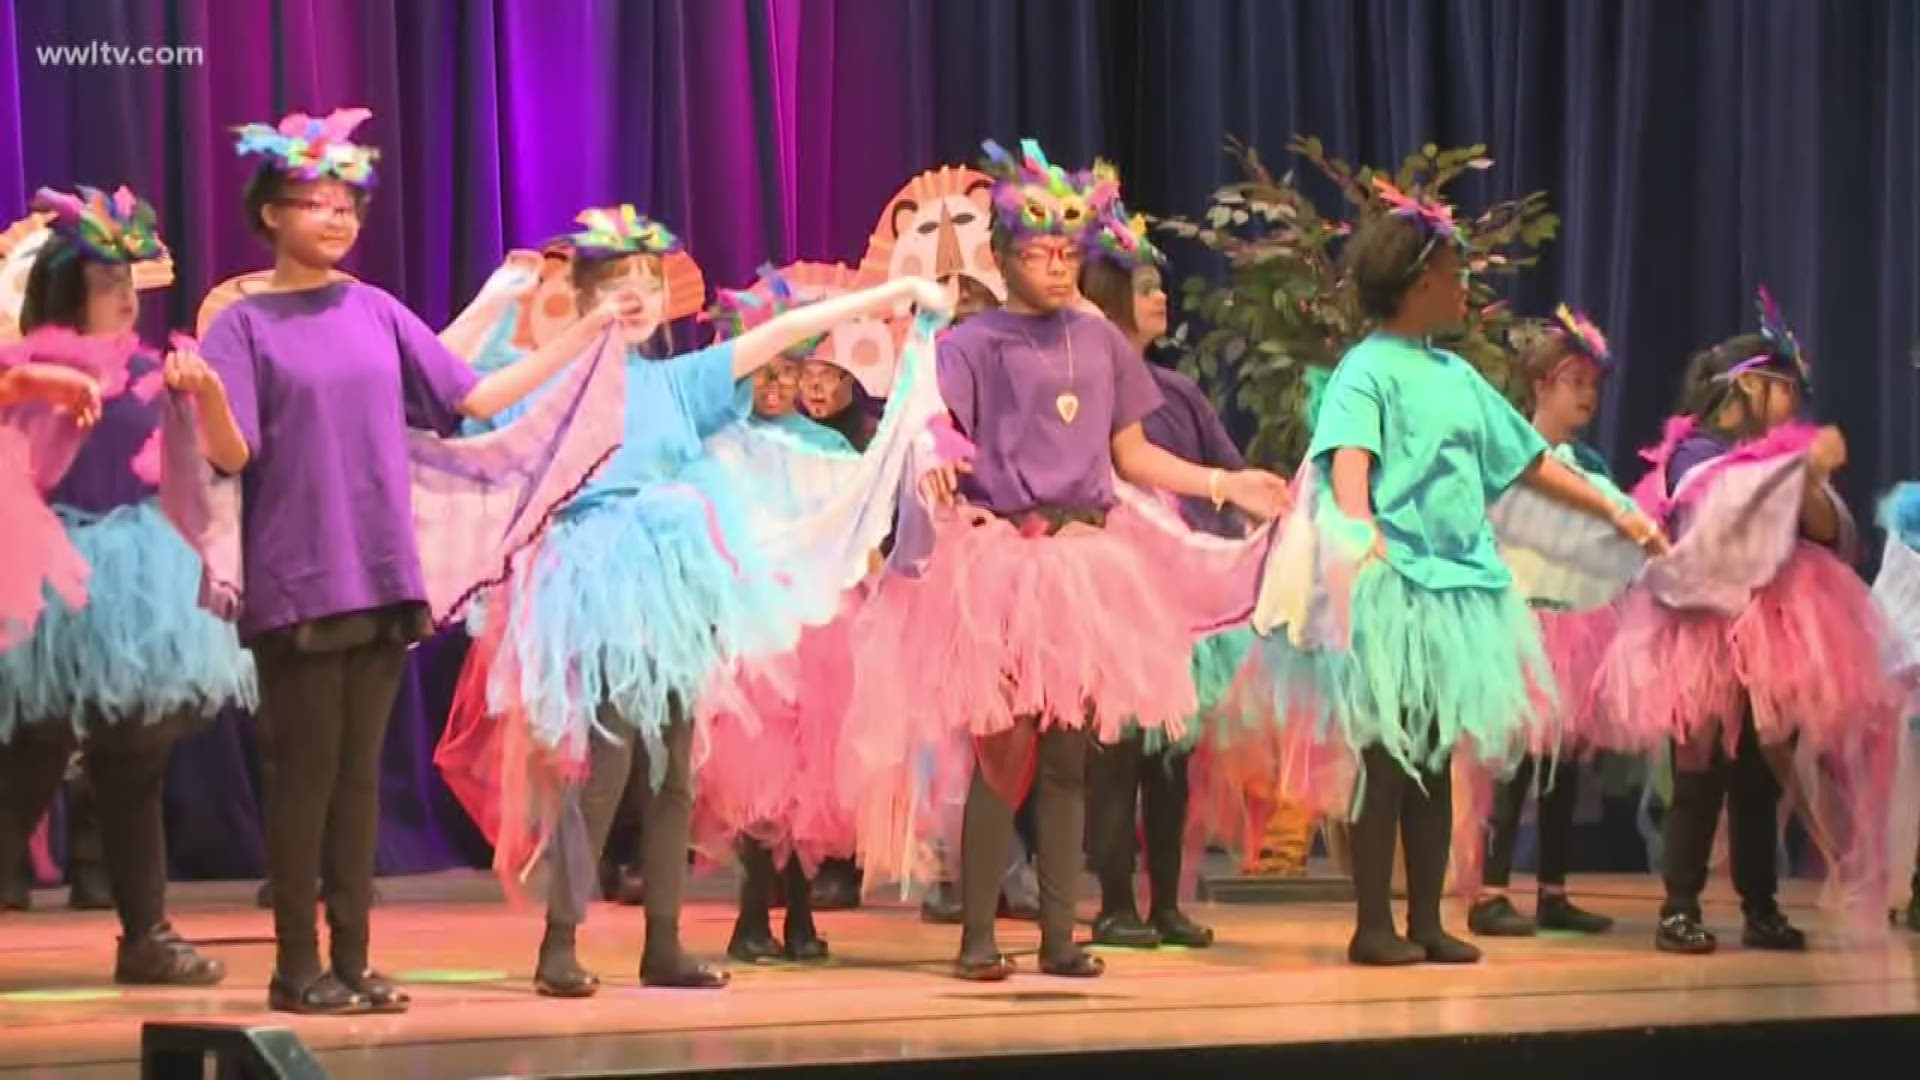 Students at St. Michael Special School performed a dress rehearsal for their annual Christmas play Thursday. It has a Broadway theme this year.